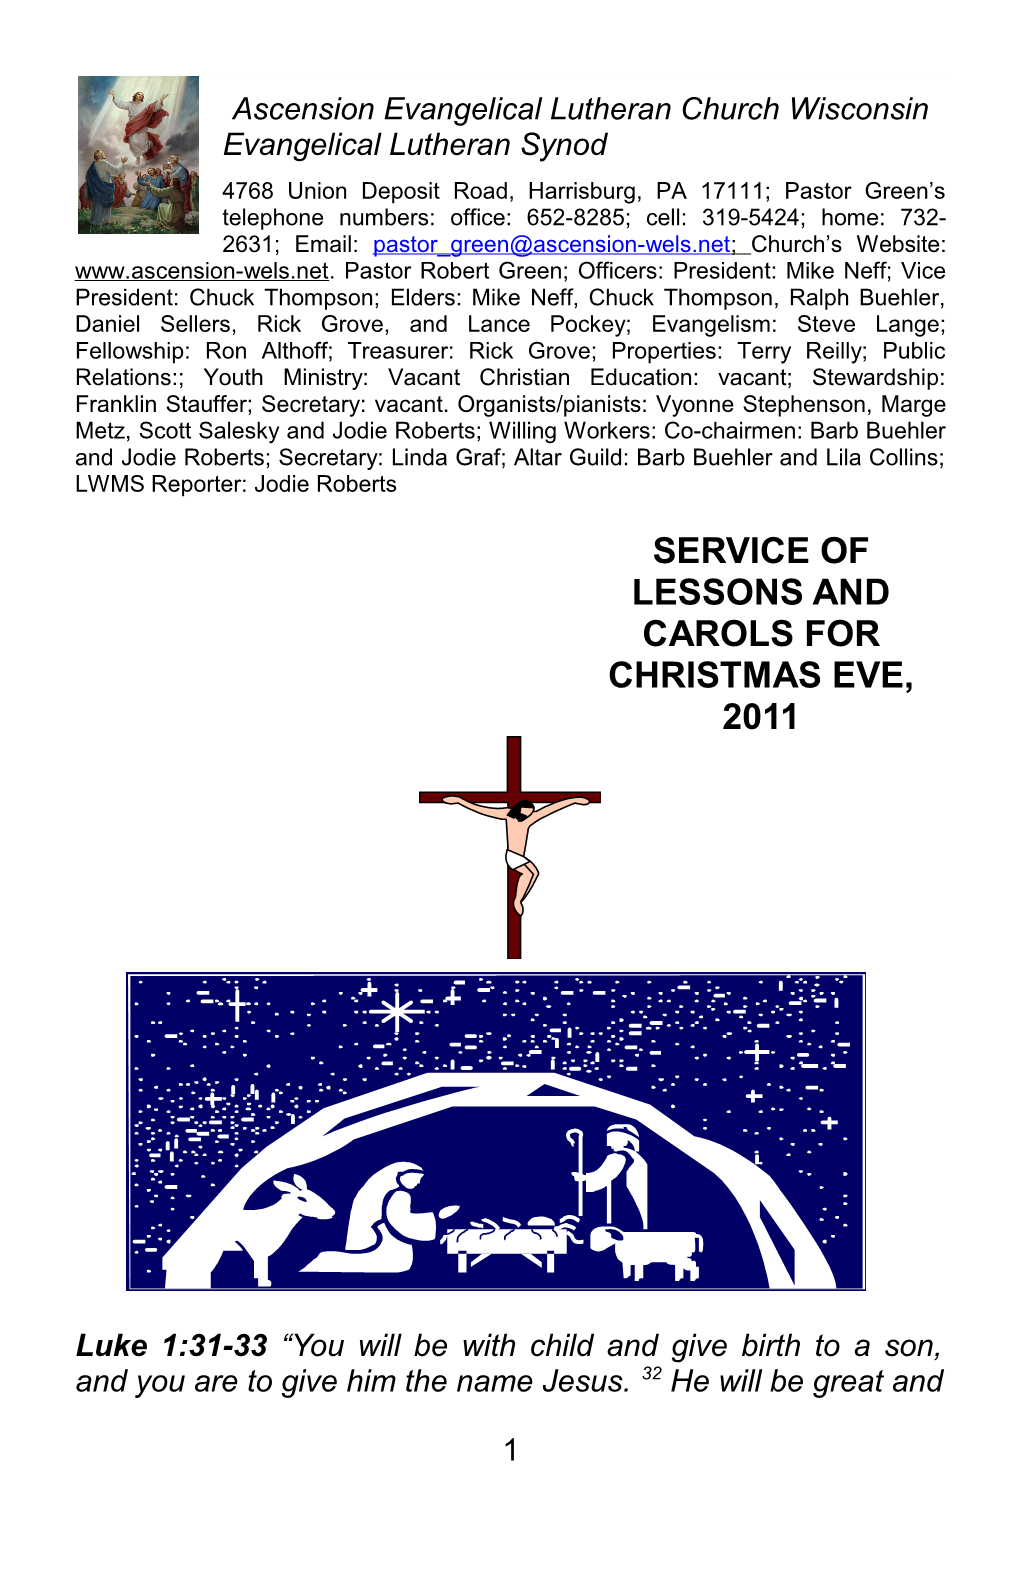 Service of Lessons and Carols For